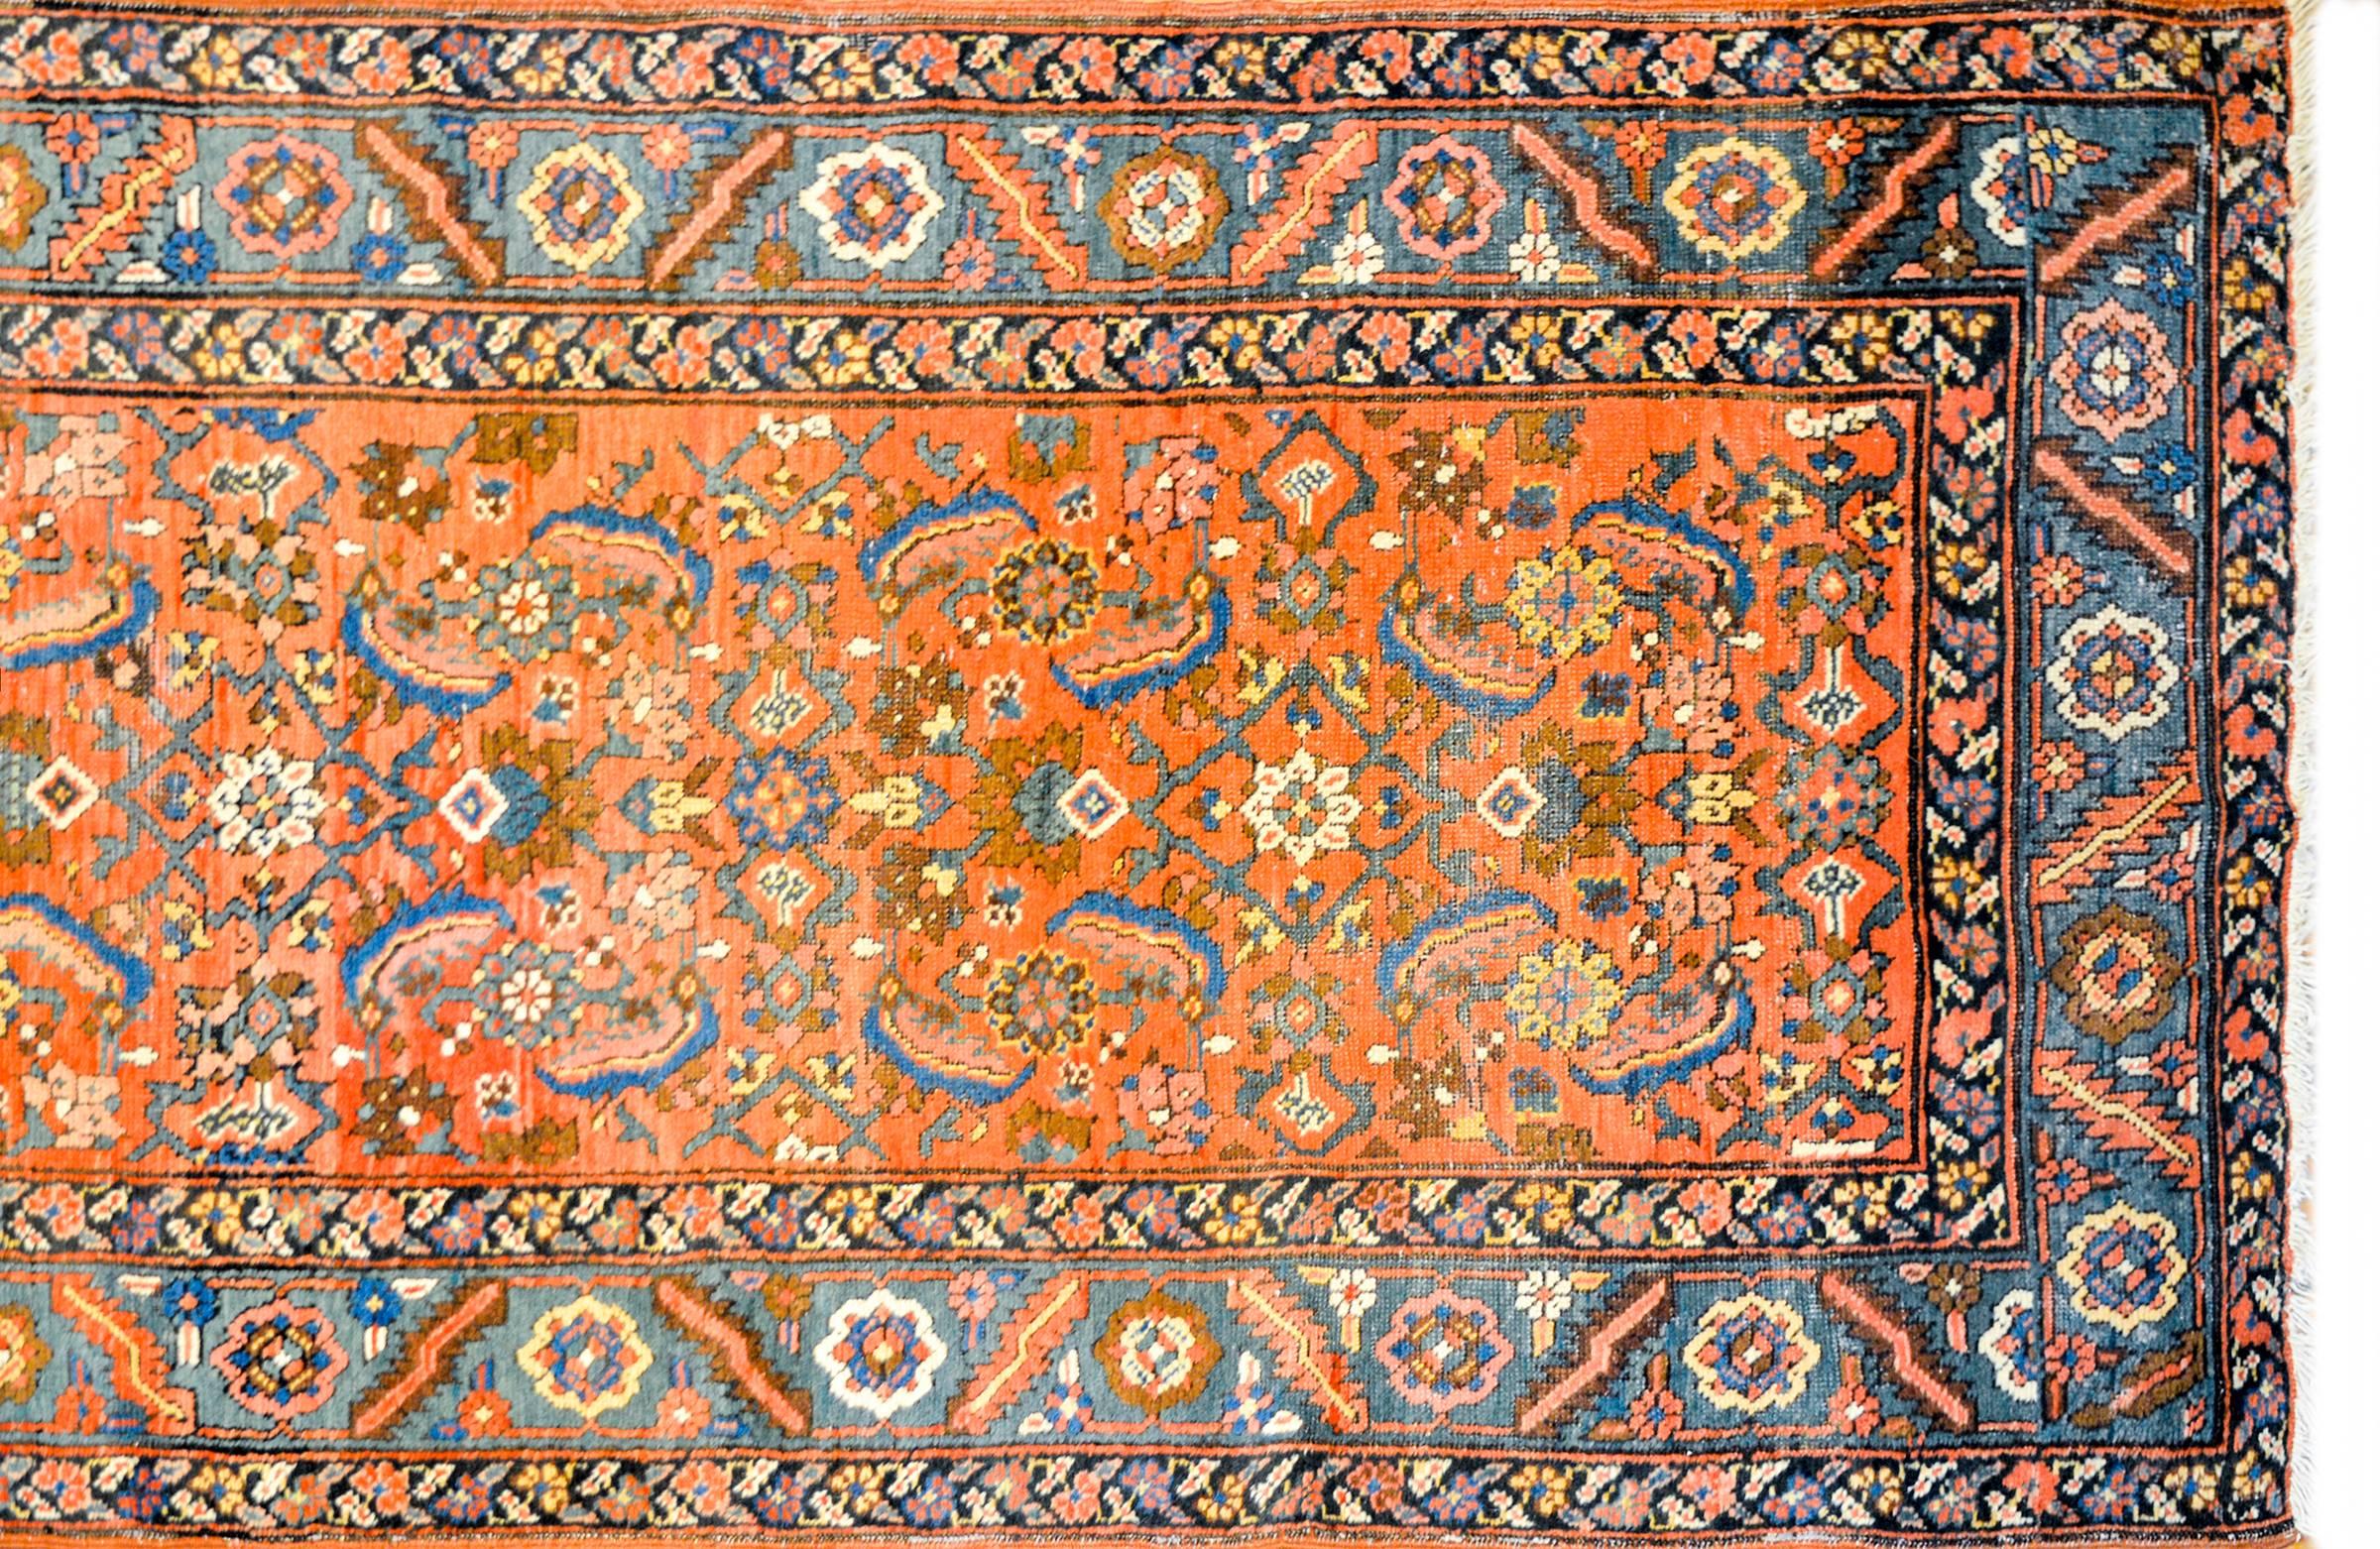 A beautiful and brilliant early 20th century Persian Heriz rug with an all-over floral pattern woven in rich light and dark indigo, gold, dark red and white vegetable dyed wool, on a bold coral background. The border is wide, with a beautiful floral